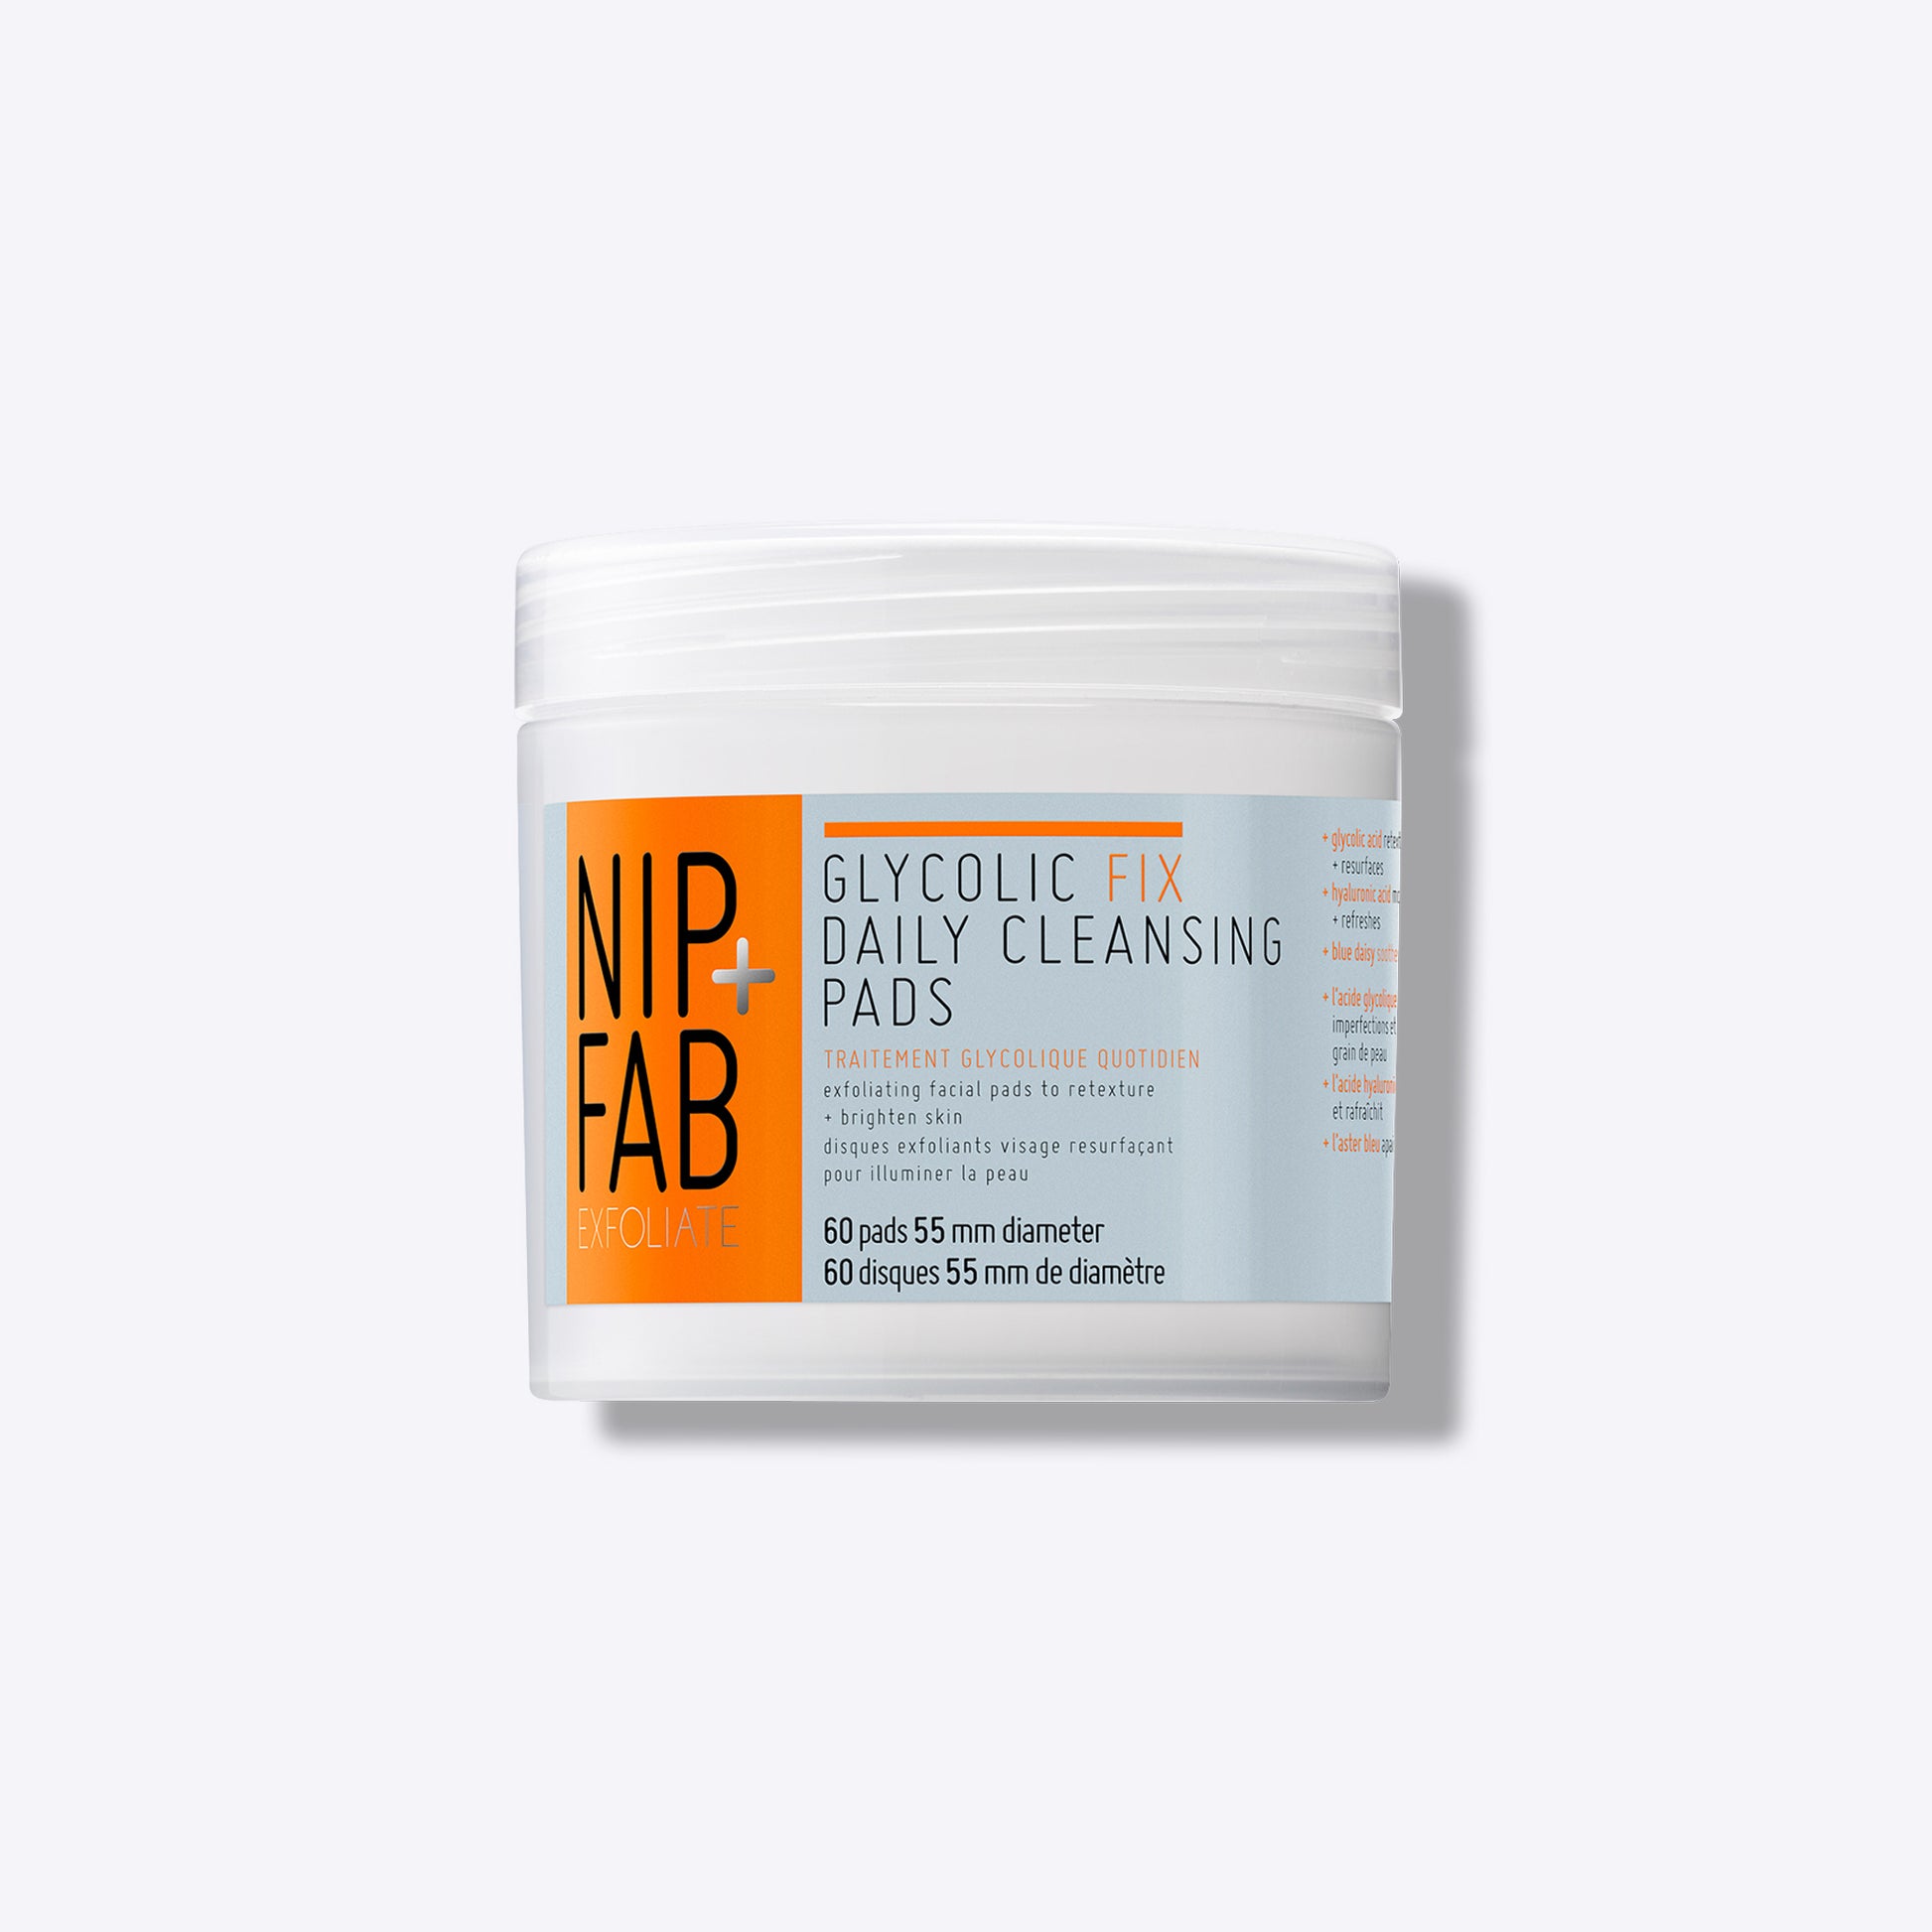 Glycolic Fix Daily Cleansing Pads